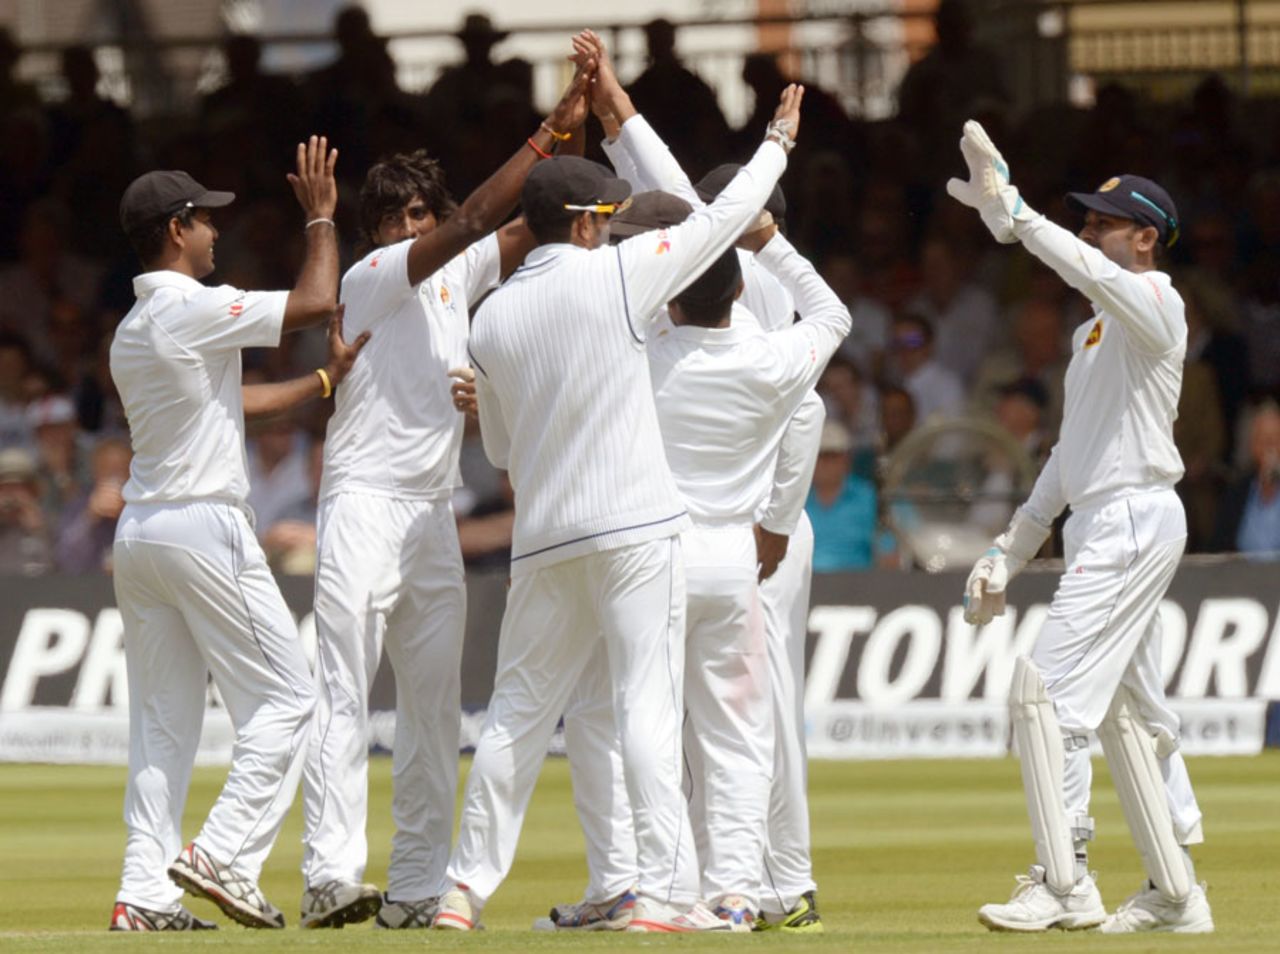 Nuwan Pradeep claimed his second wicket in the morning session, England v Sri Lanka, 1st Investec Test, Lord's, 1st day, June 12, 2014